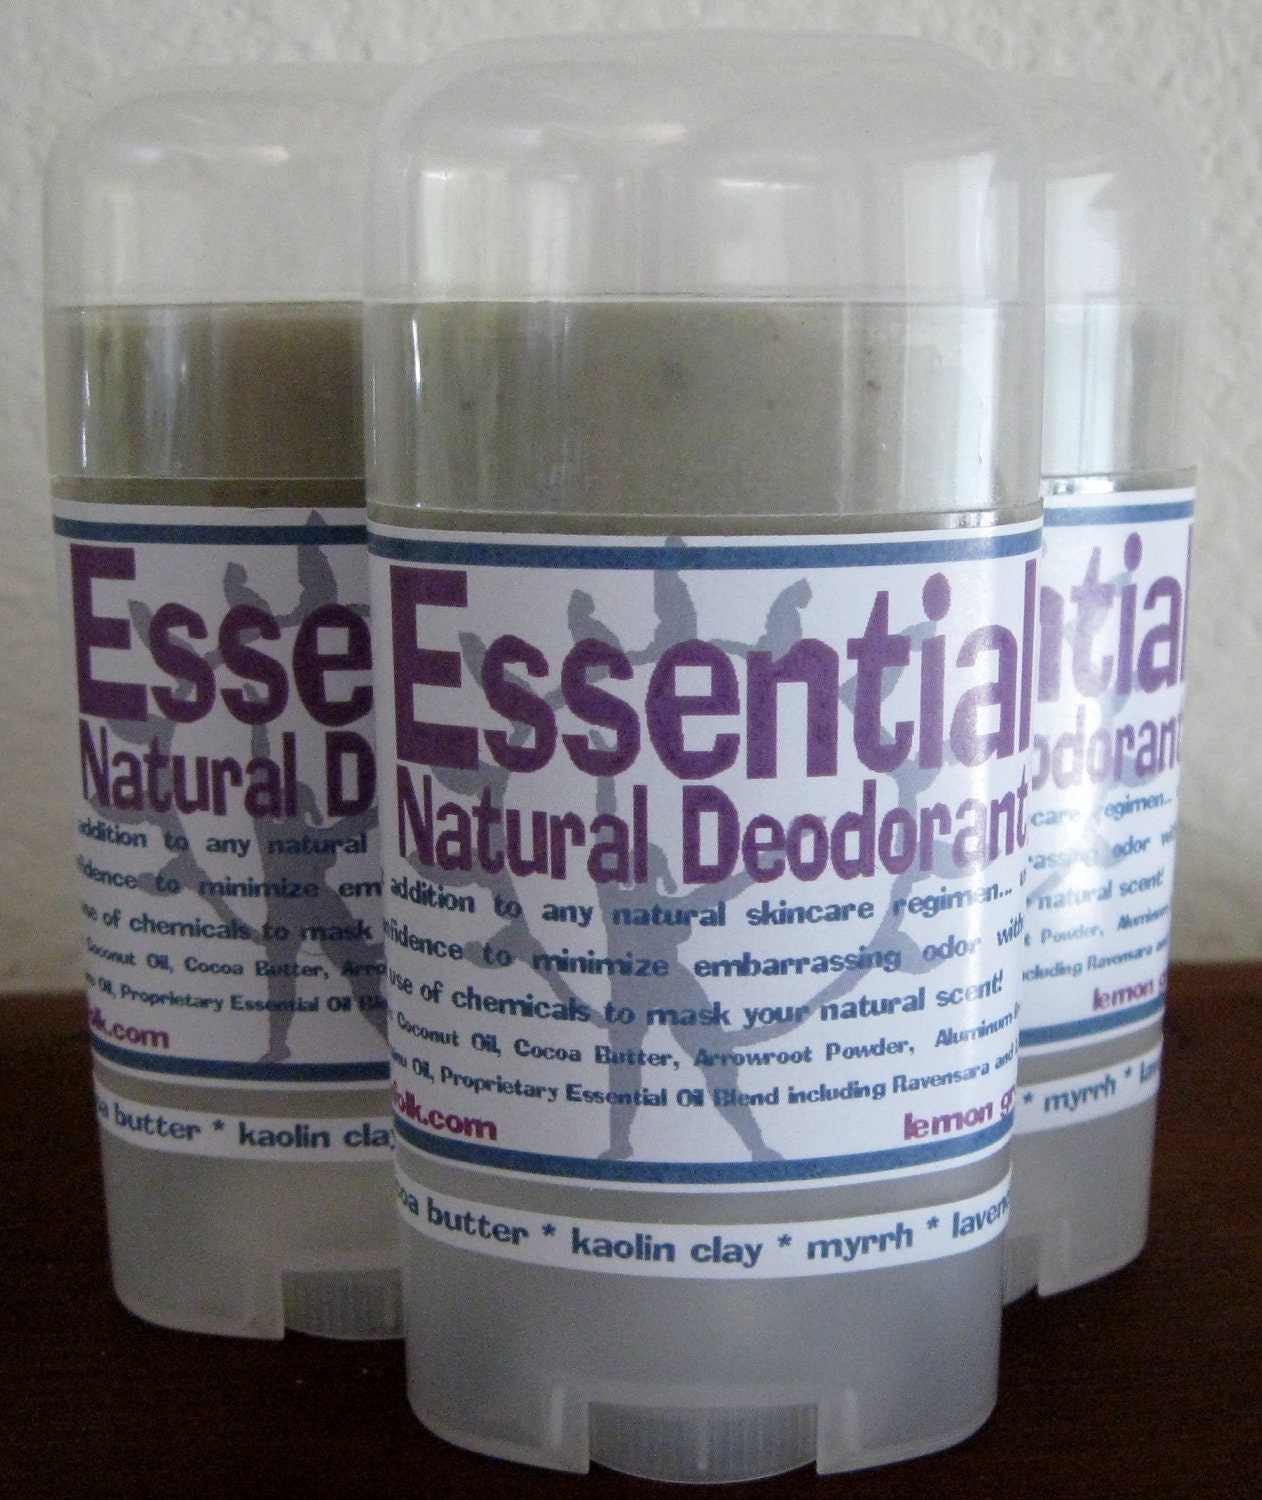 Essential All-Natural Deodorant... Combat Nasty Body Odor while Conditioning with Virgin Coconut Oil